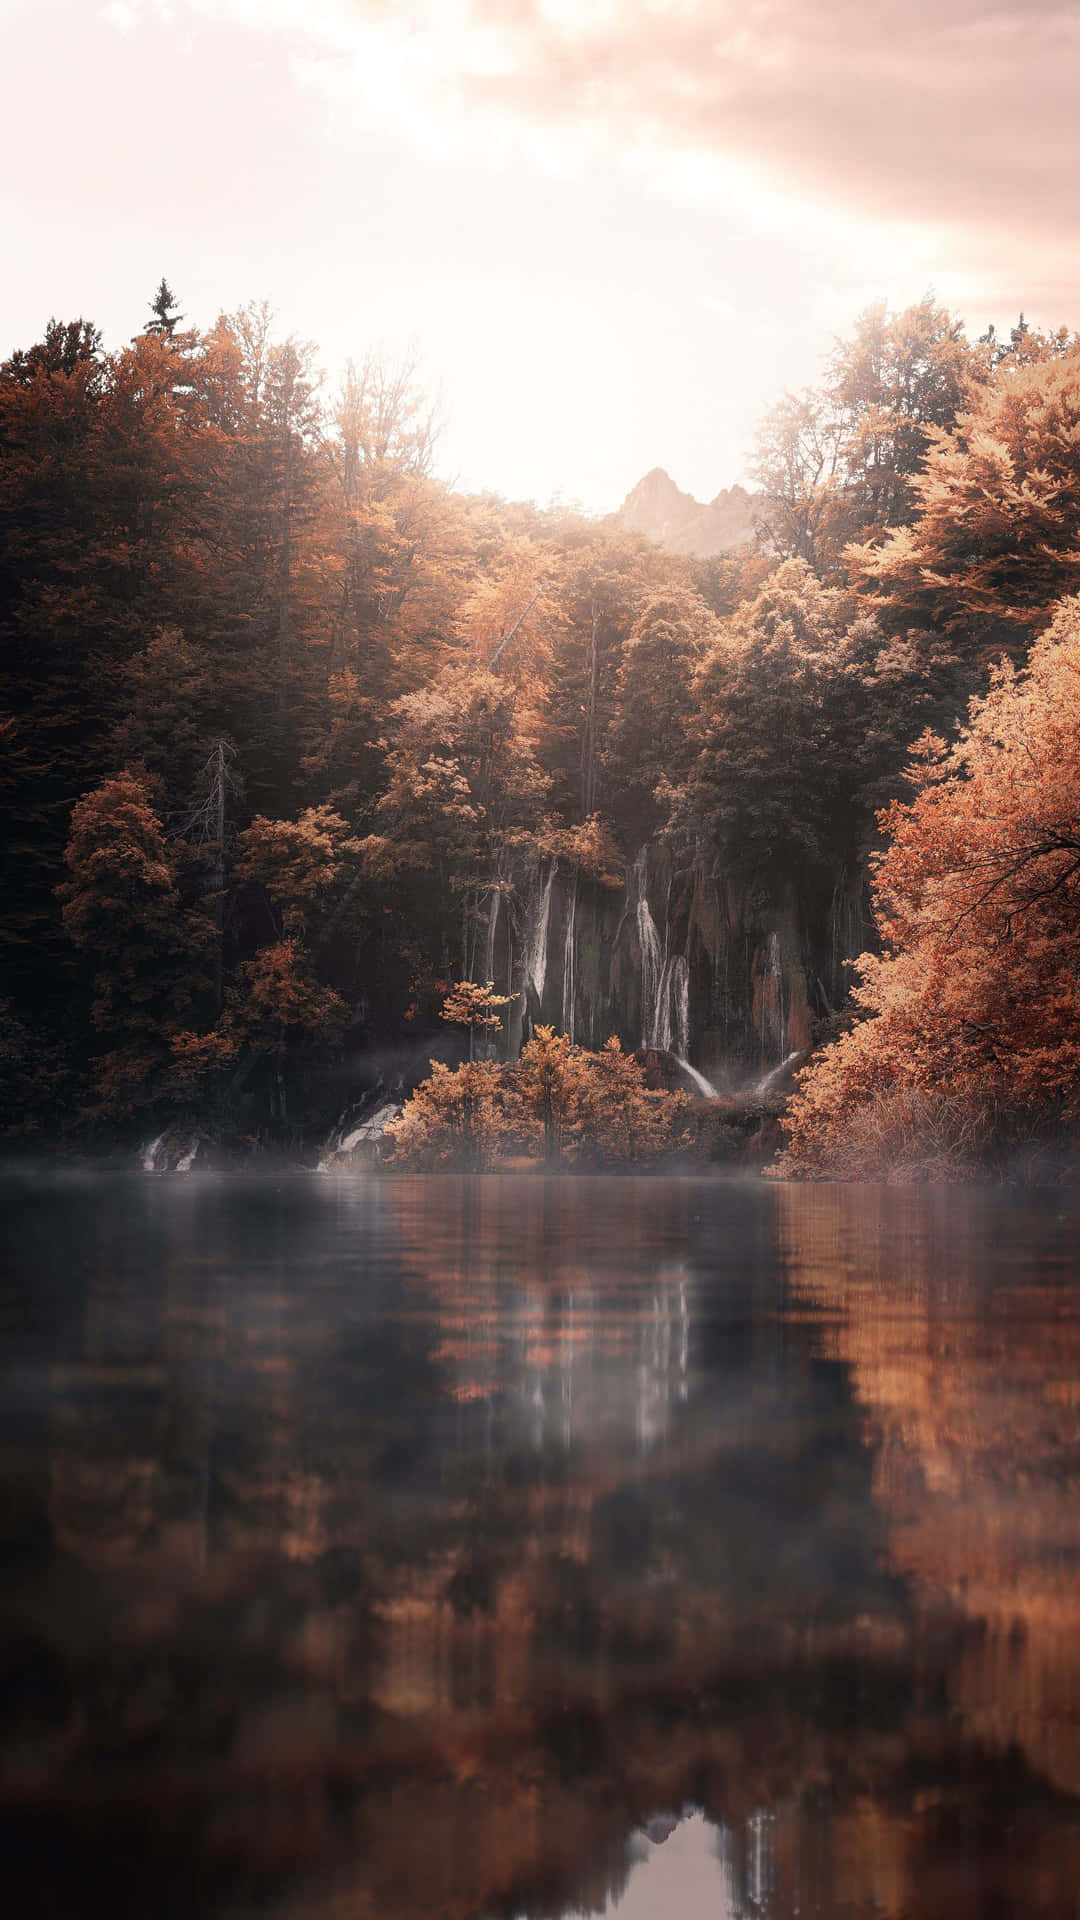 The beauty of autumn, captured in one stunning shot